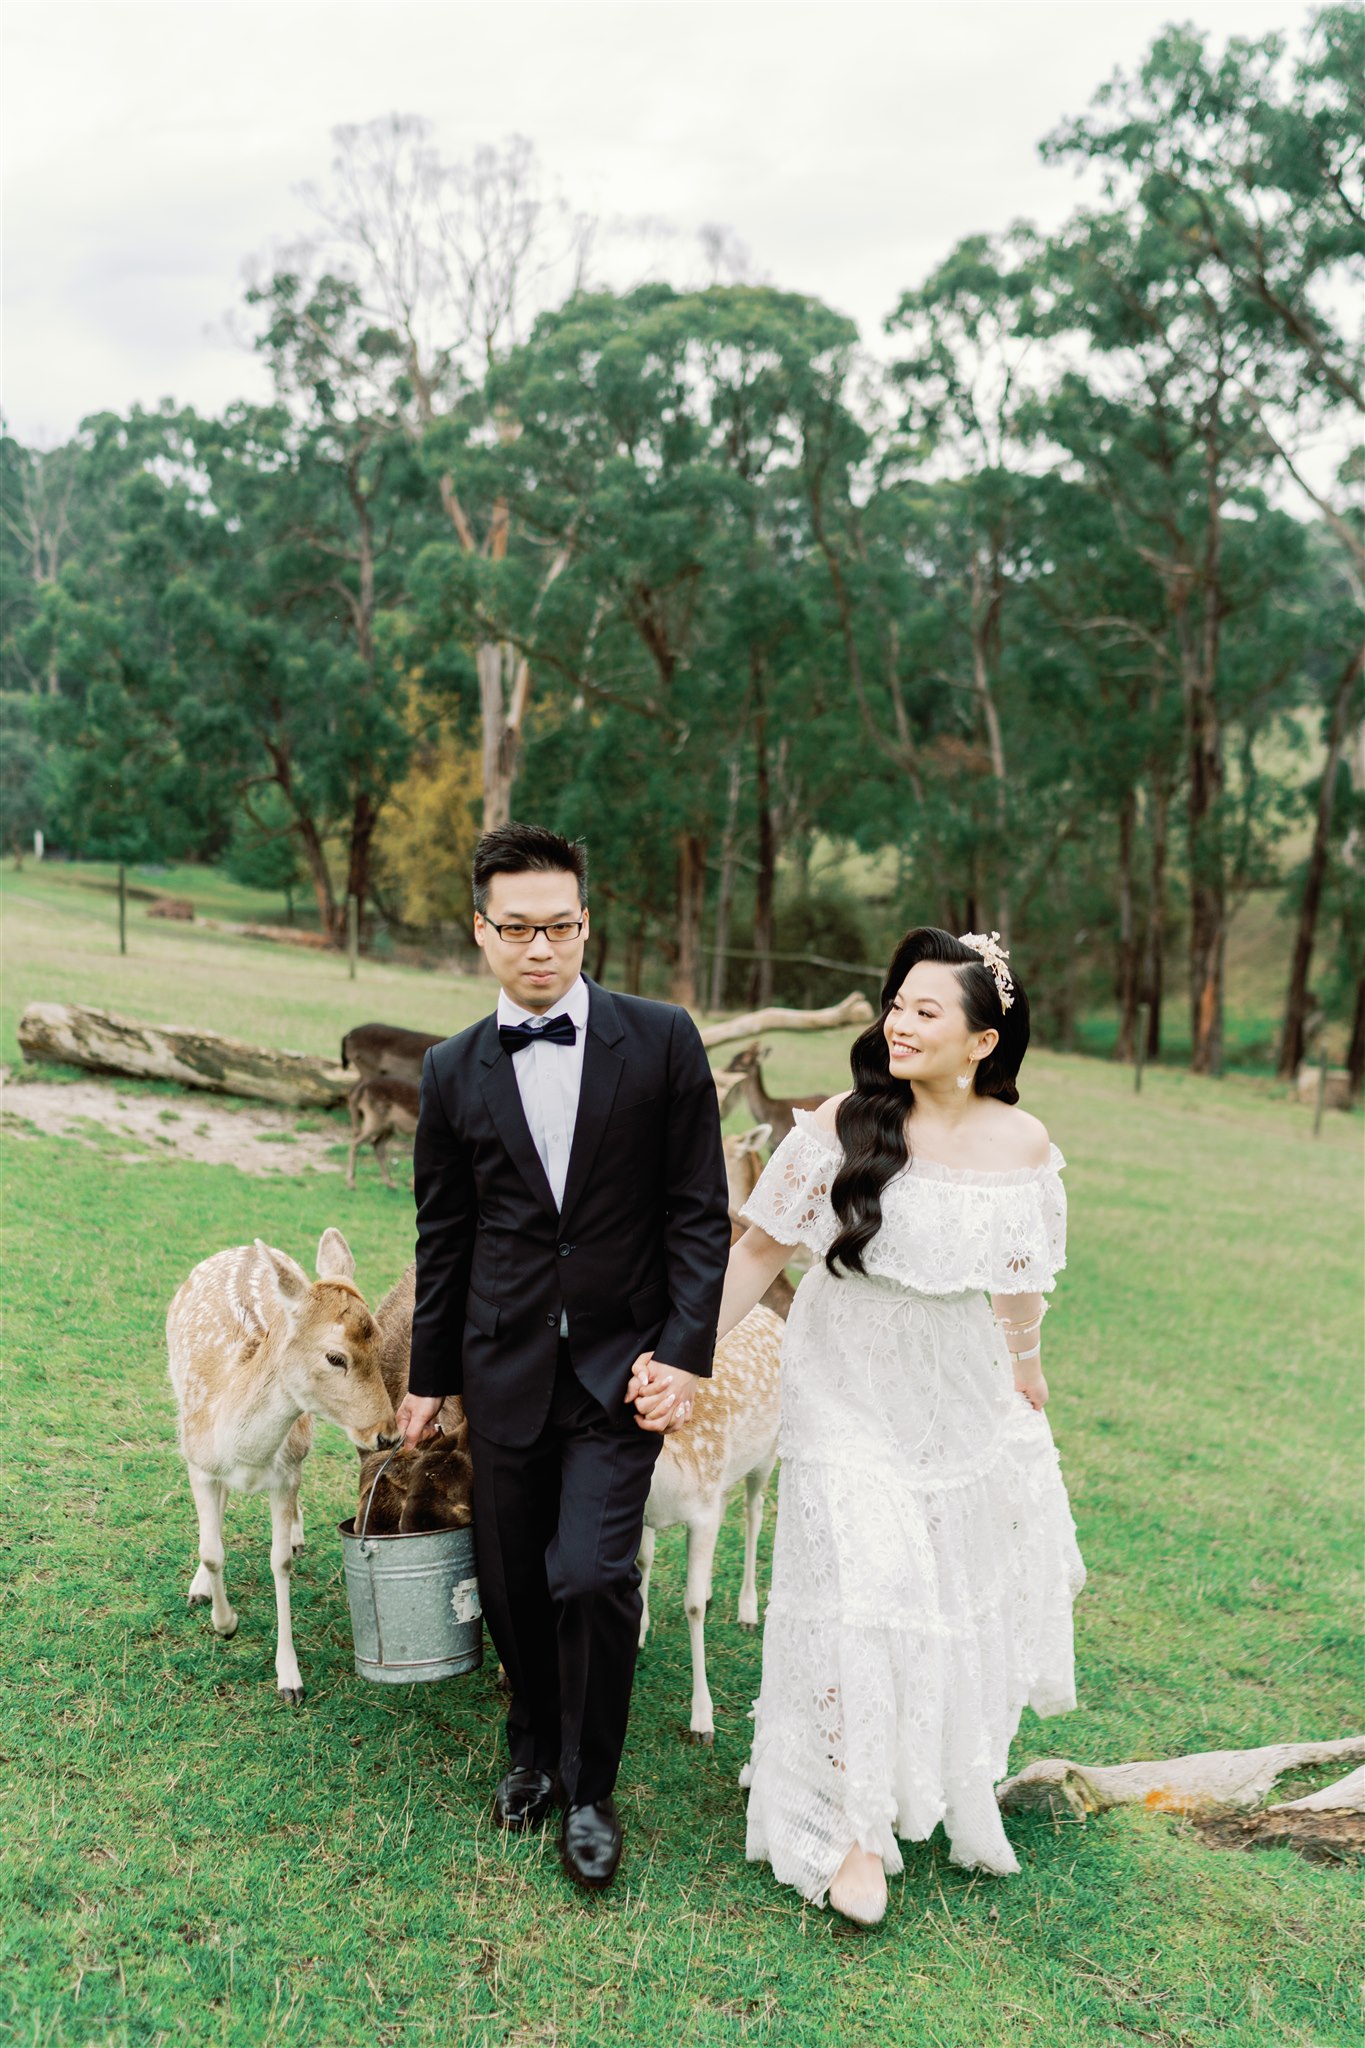 Pre wedding photo shoot with engaged couple walking with deer at Gum Gully Farm in Silvan